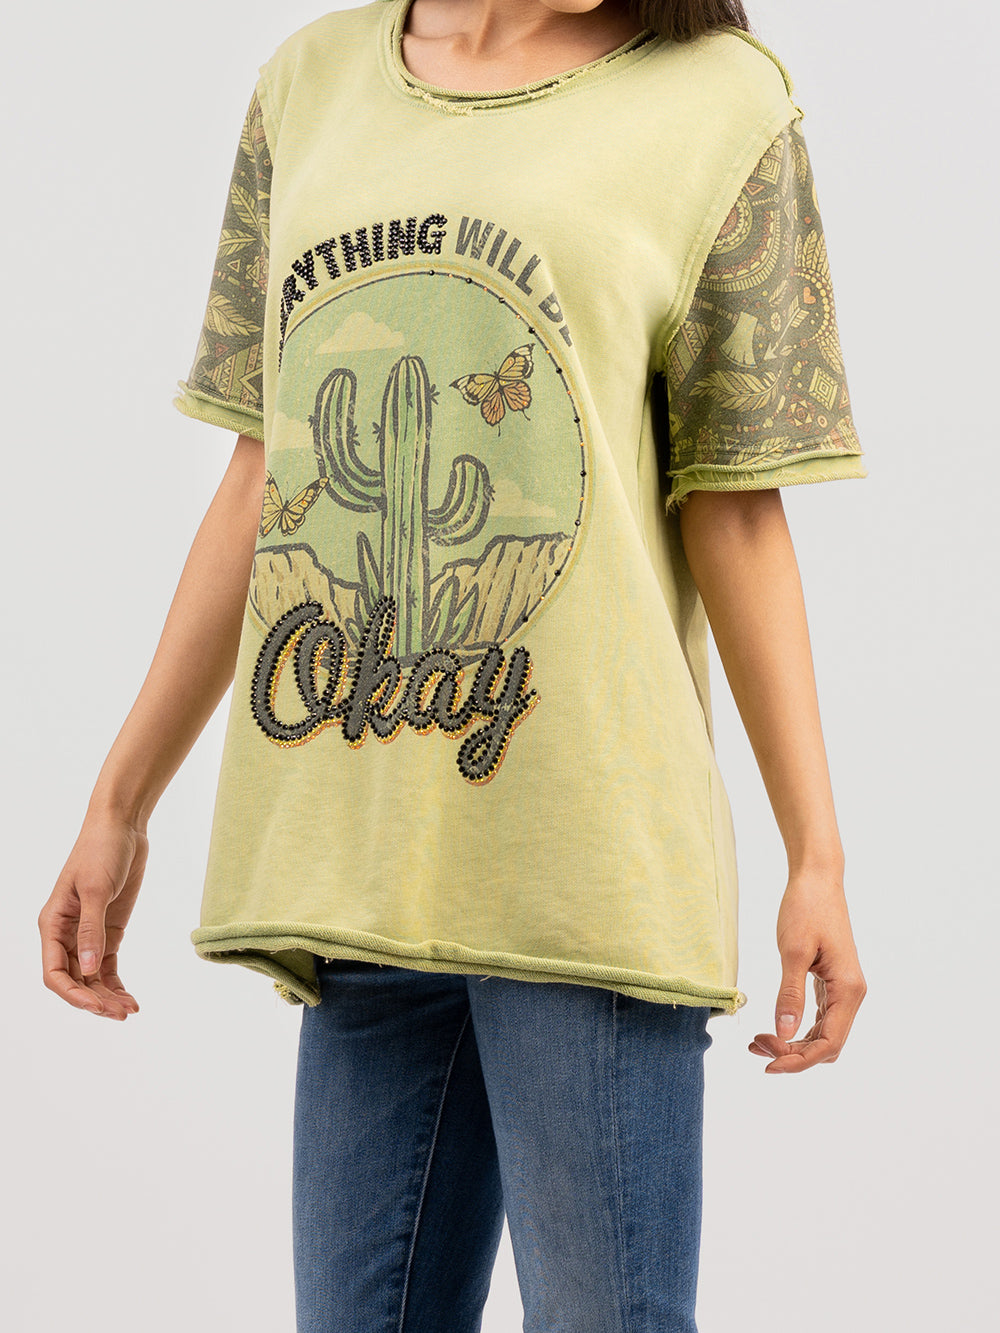 Delila Women Embroidered Washed Cactus Tee With Rhinestones - Montana West World